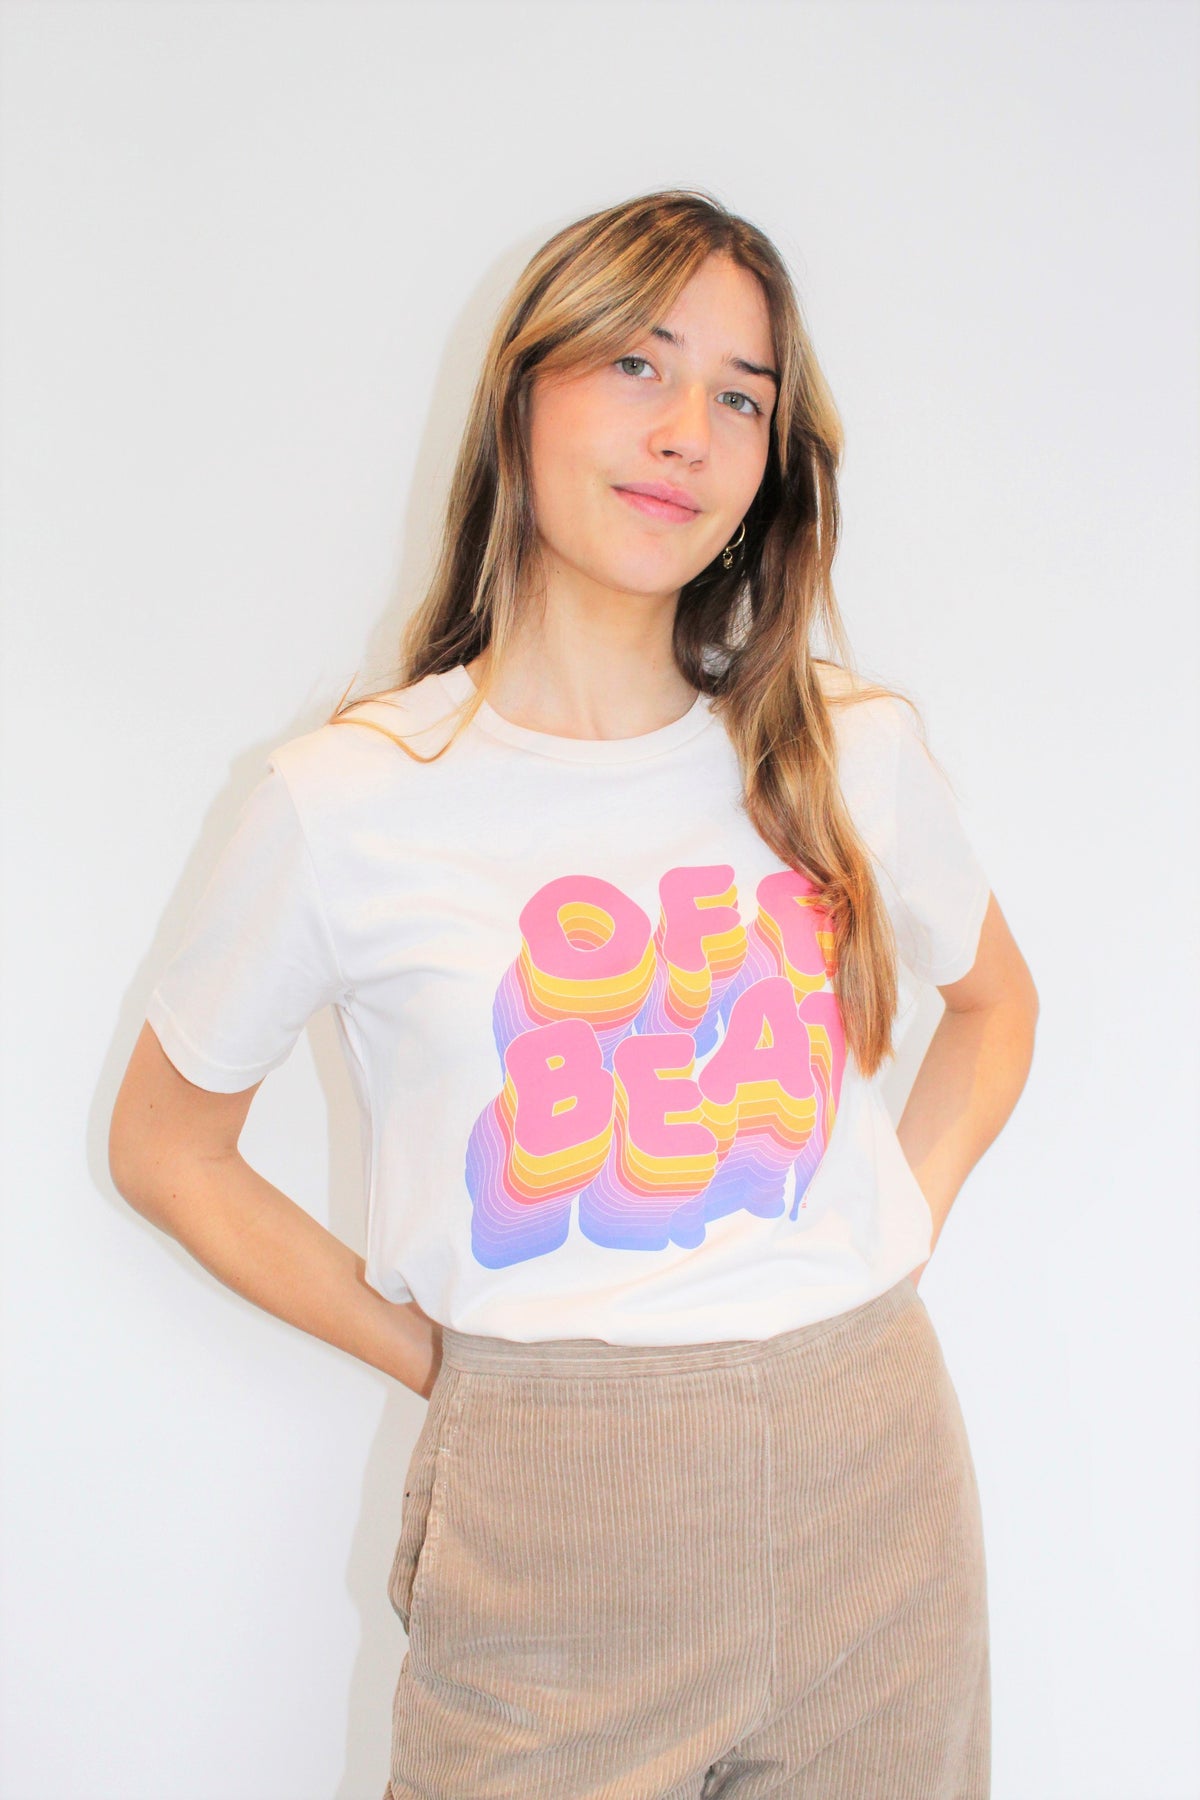 BS Off Beat Tee in Vintage White